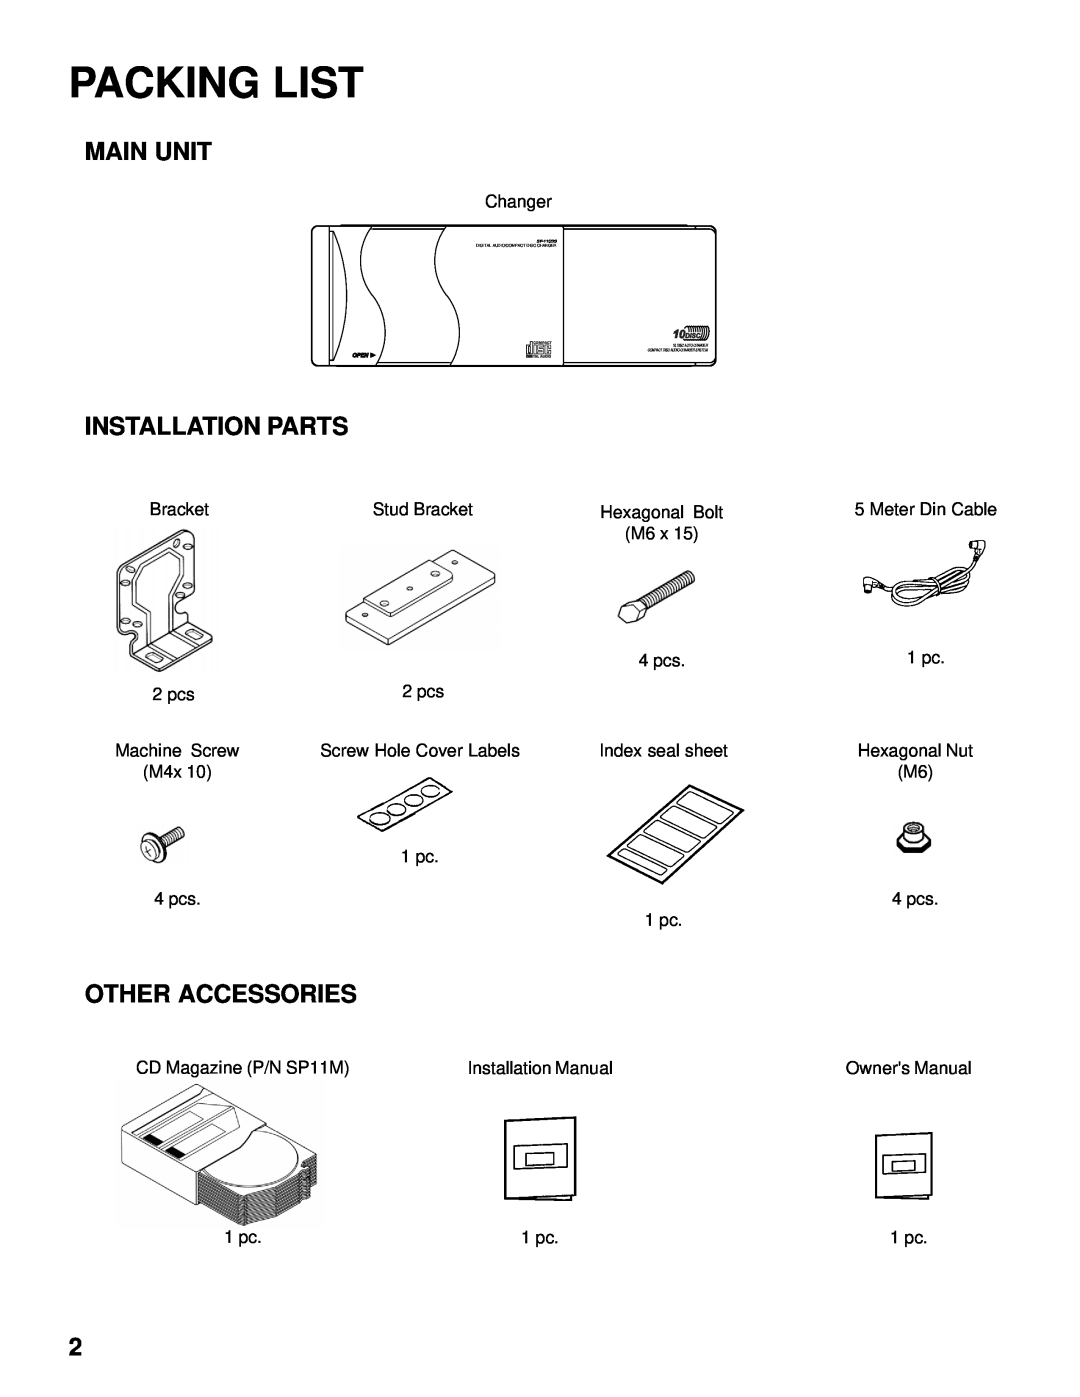 Audiovox SP-11CDS installation manual Packing List, Main Unit, Installation Parts, Other Accessories 